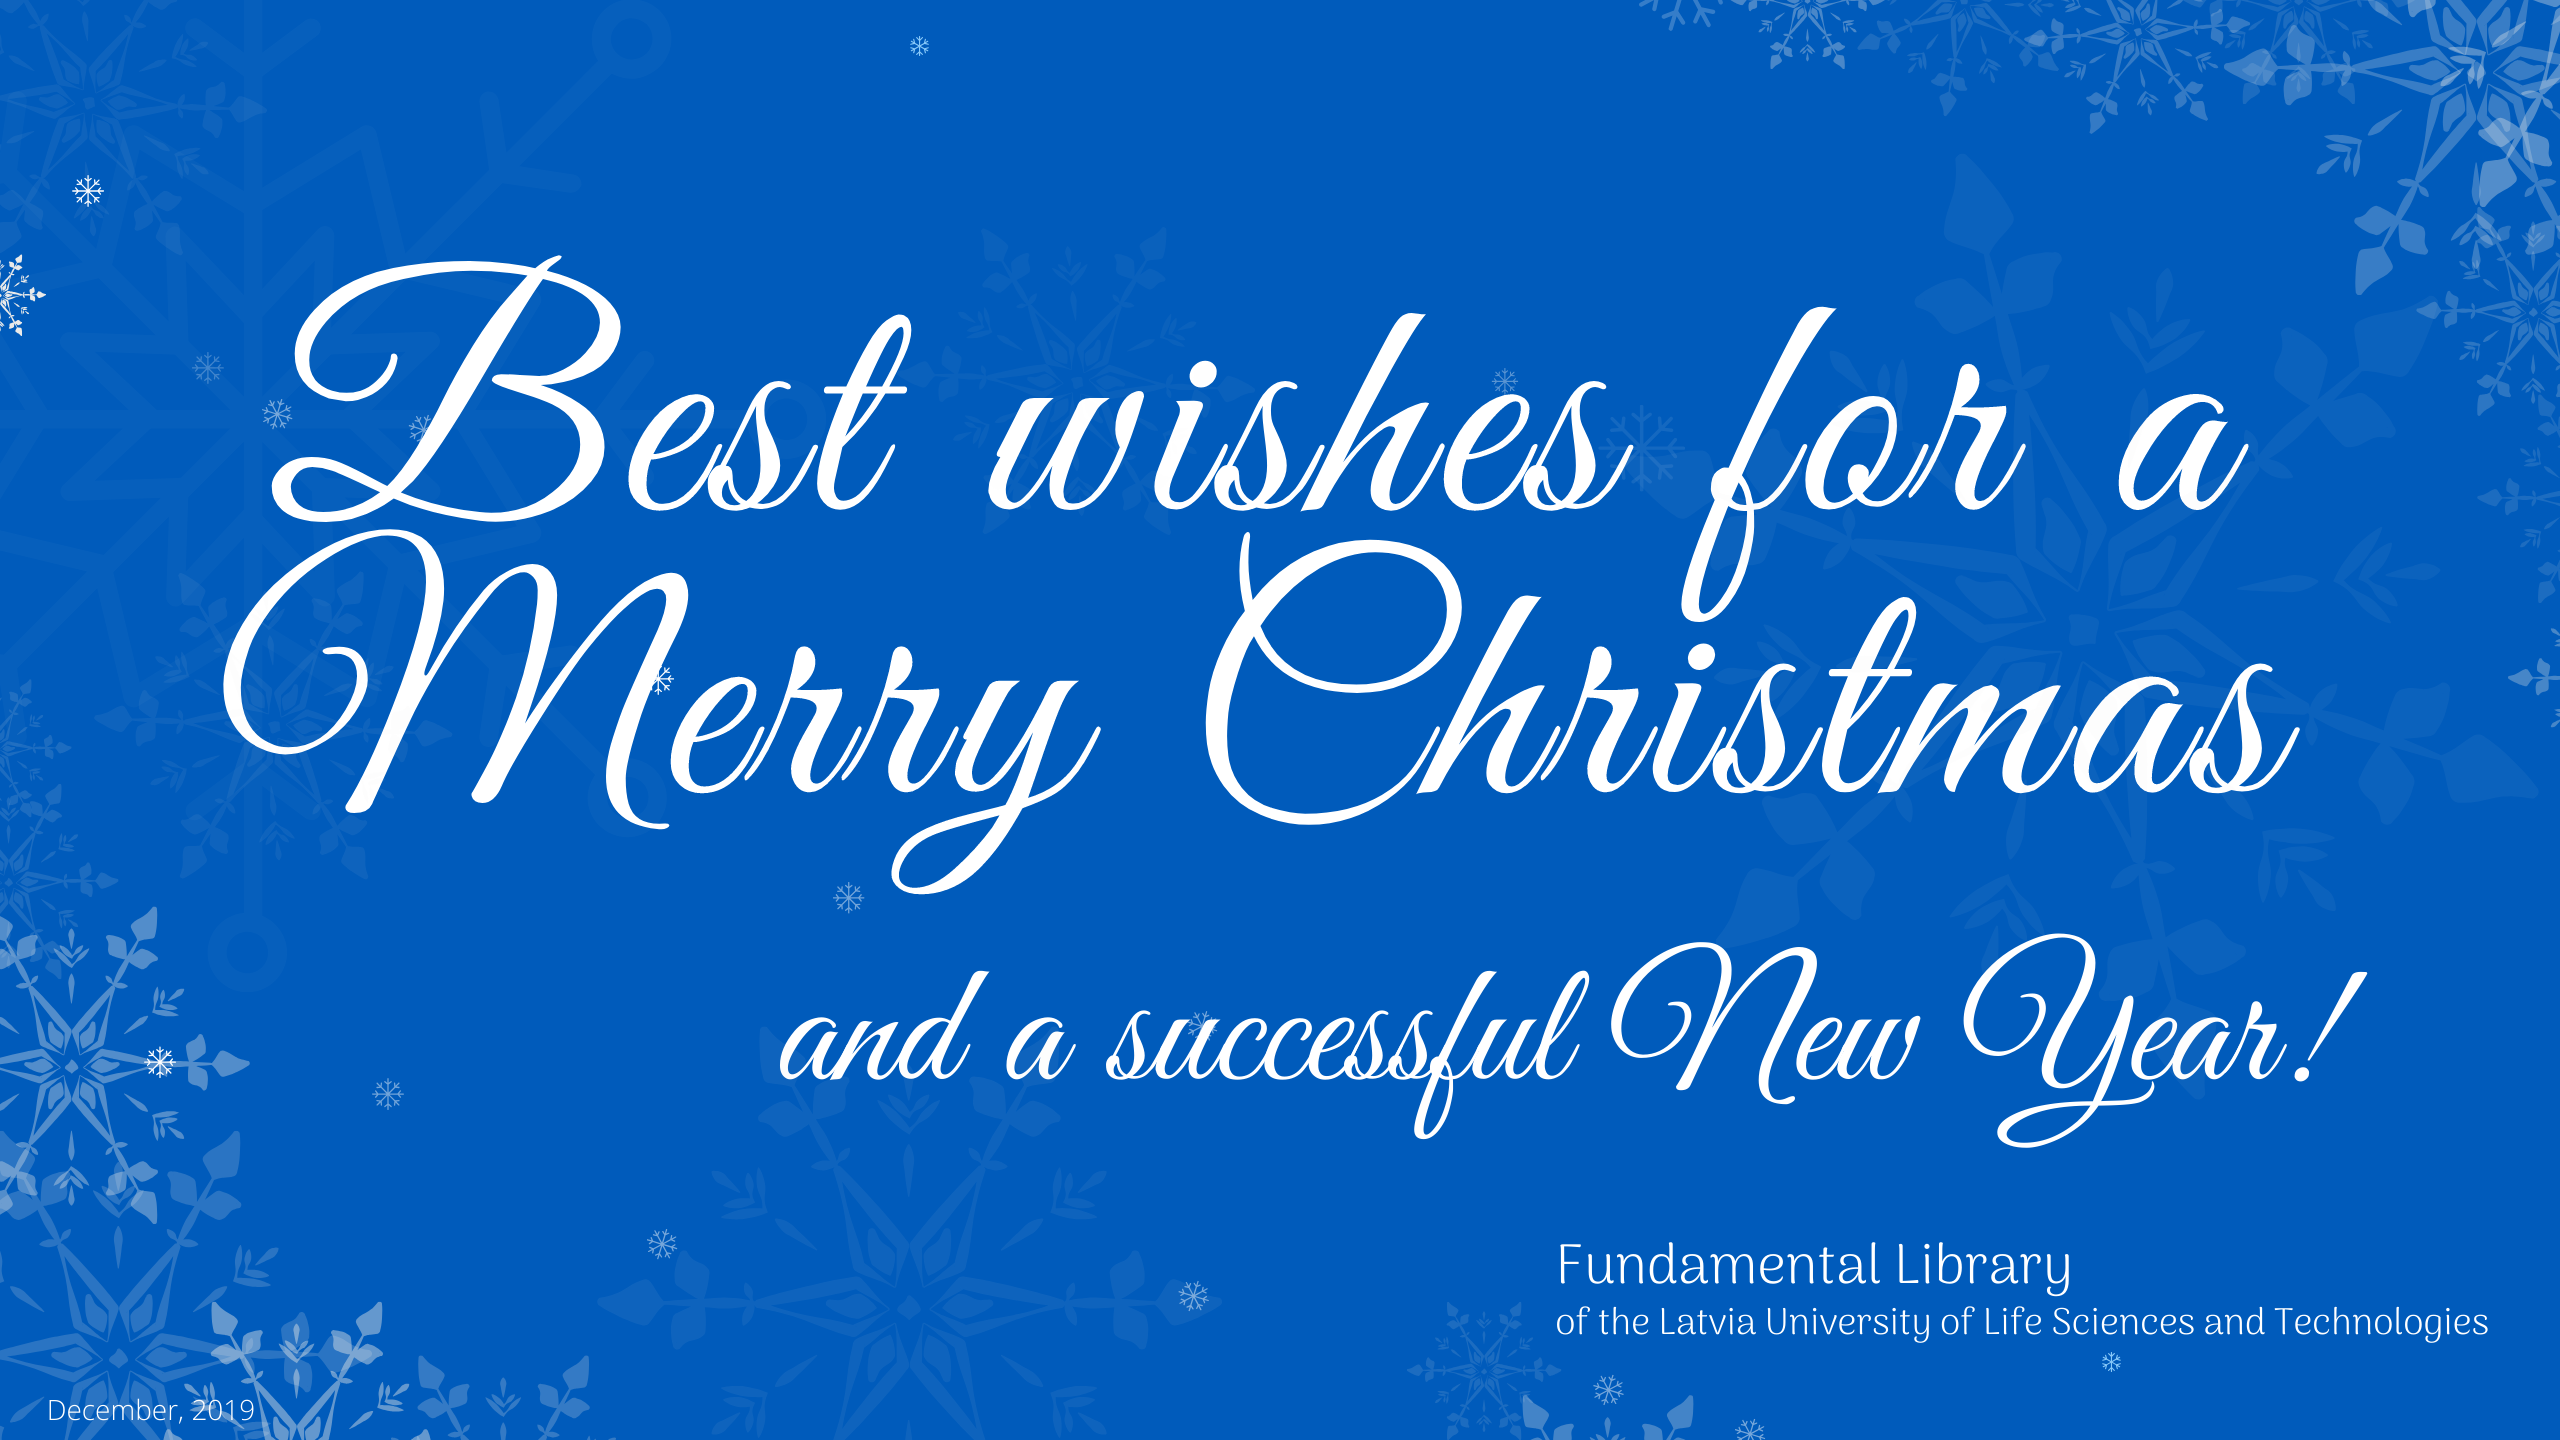 Best wishes for a Merry Christmas and a successful New Year!